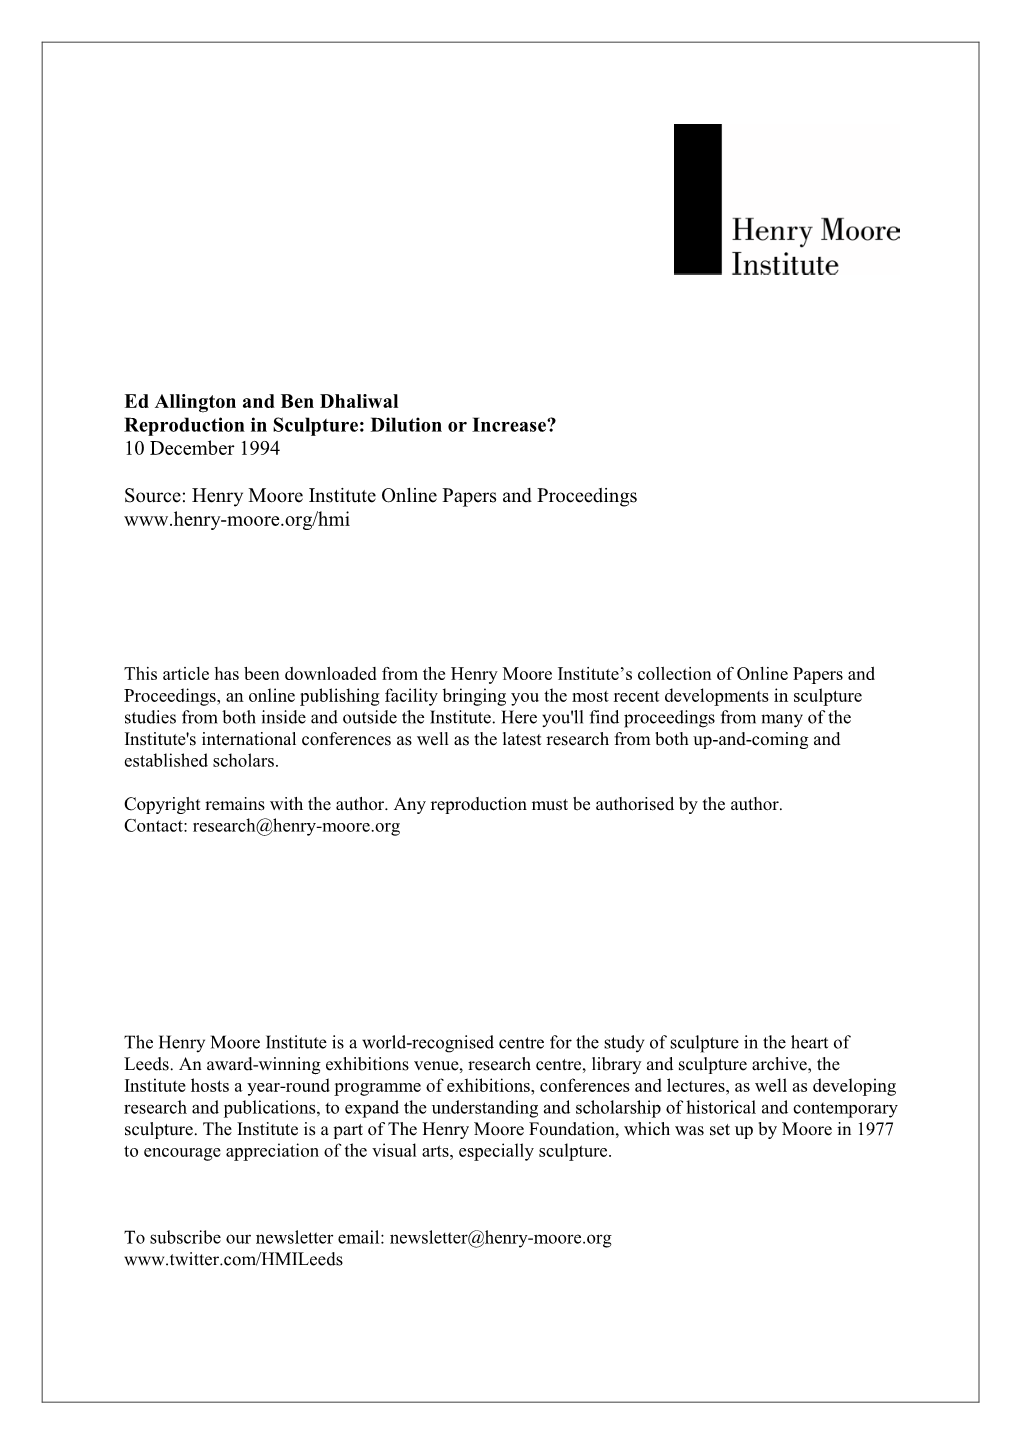 Henry Moore Institute Online Papers and Proceedings